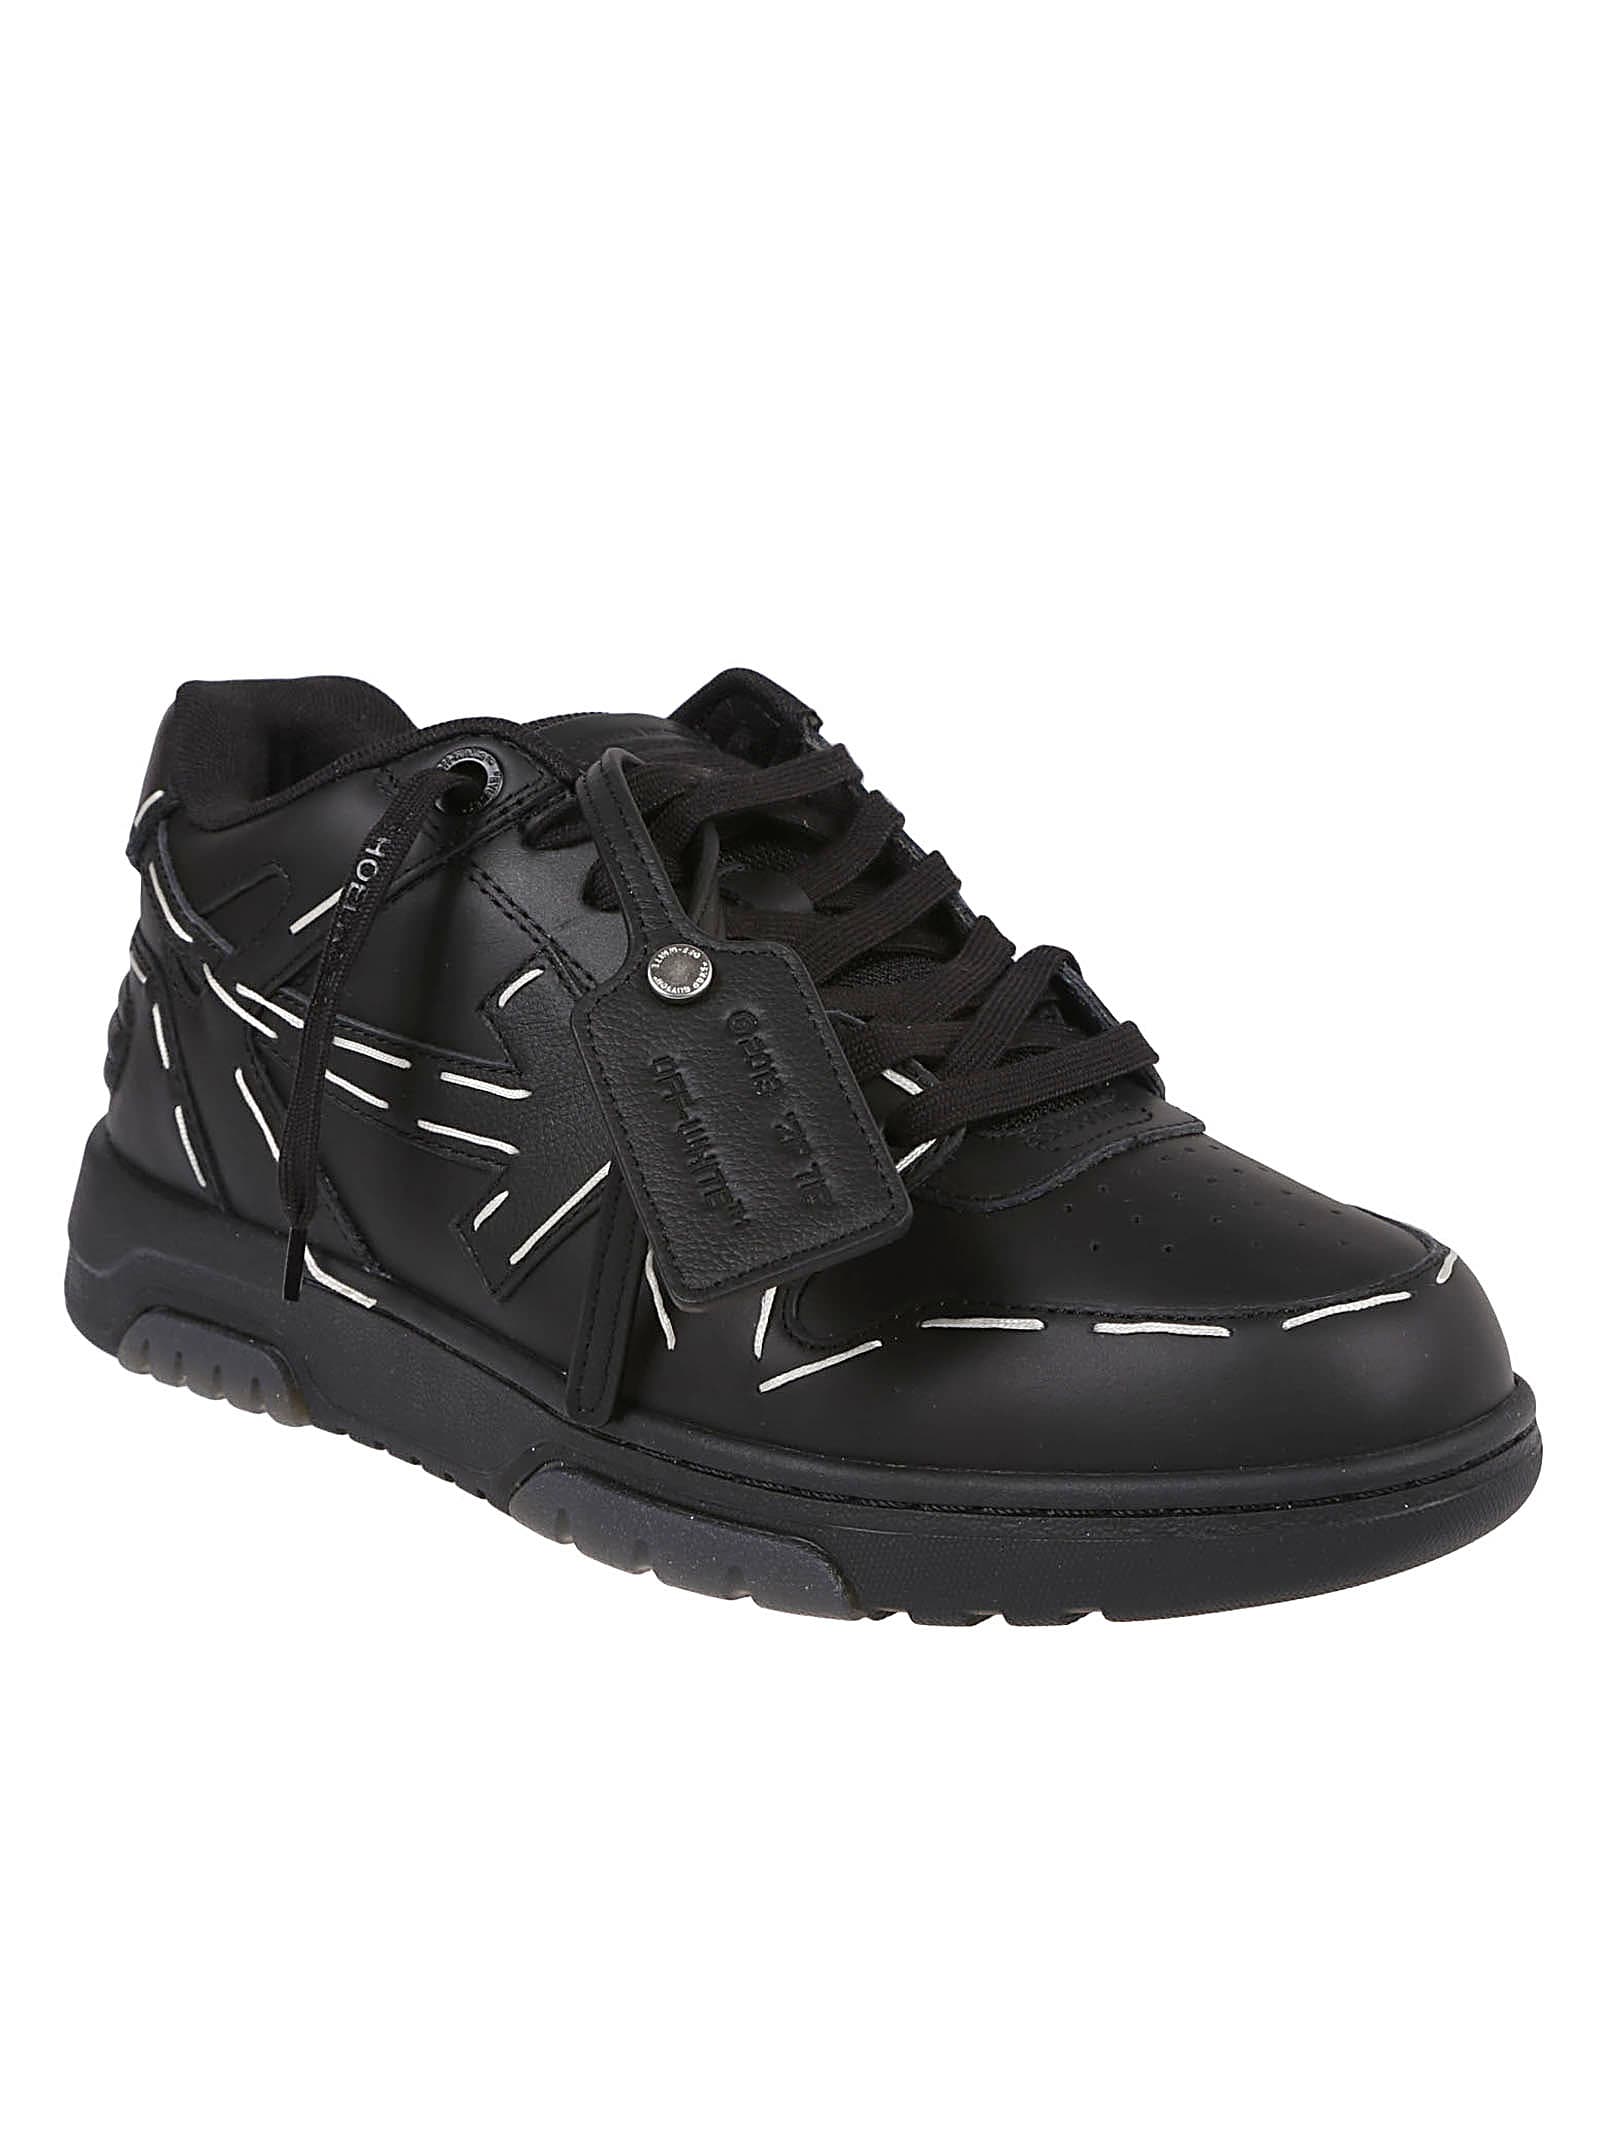 Off-White OOO Mid Sartorial Stitching - Female - Leather/Polyester/PolyesterRubber - 39 - Black